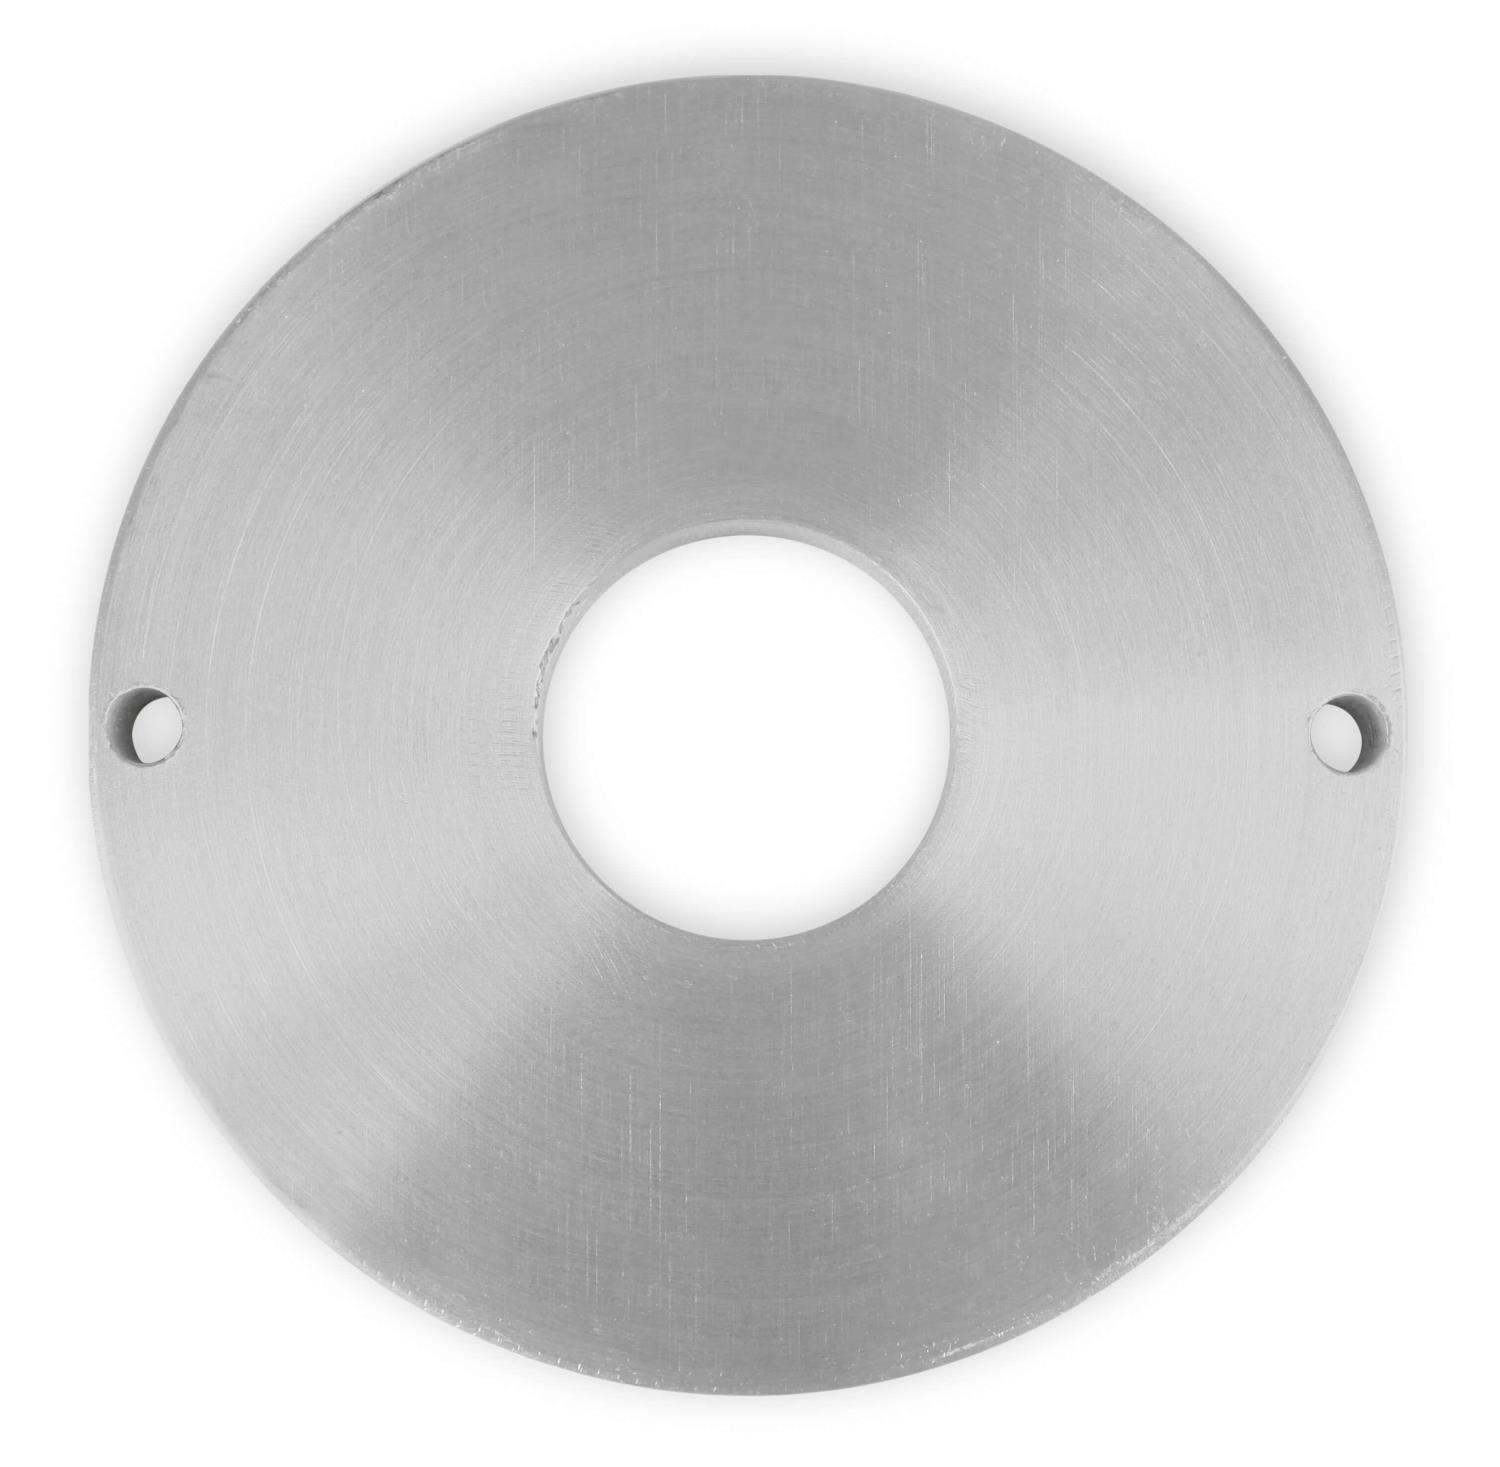 Hydraulic Throwout Bearing Shim For T-56/TR-6060 Transmissions [.625 in.]